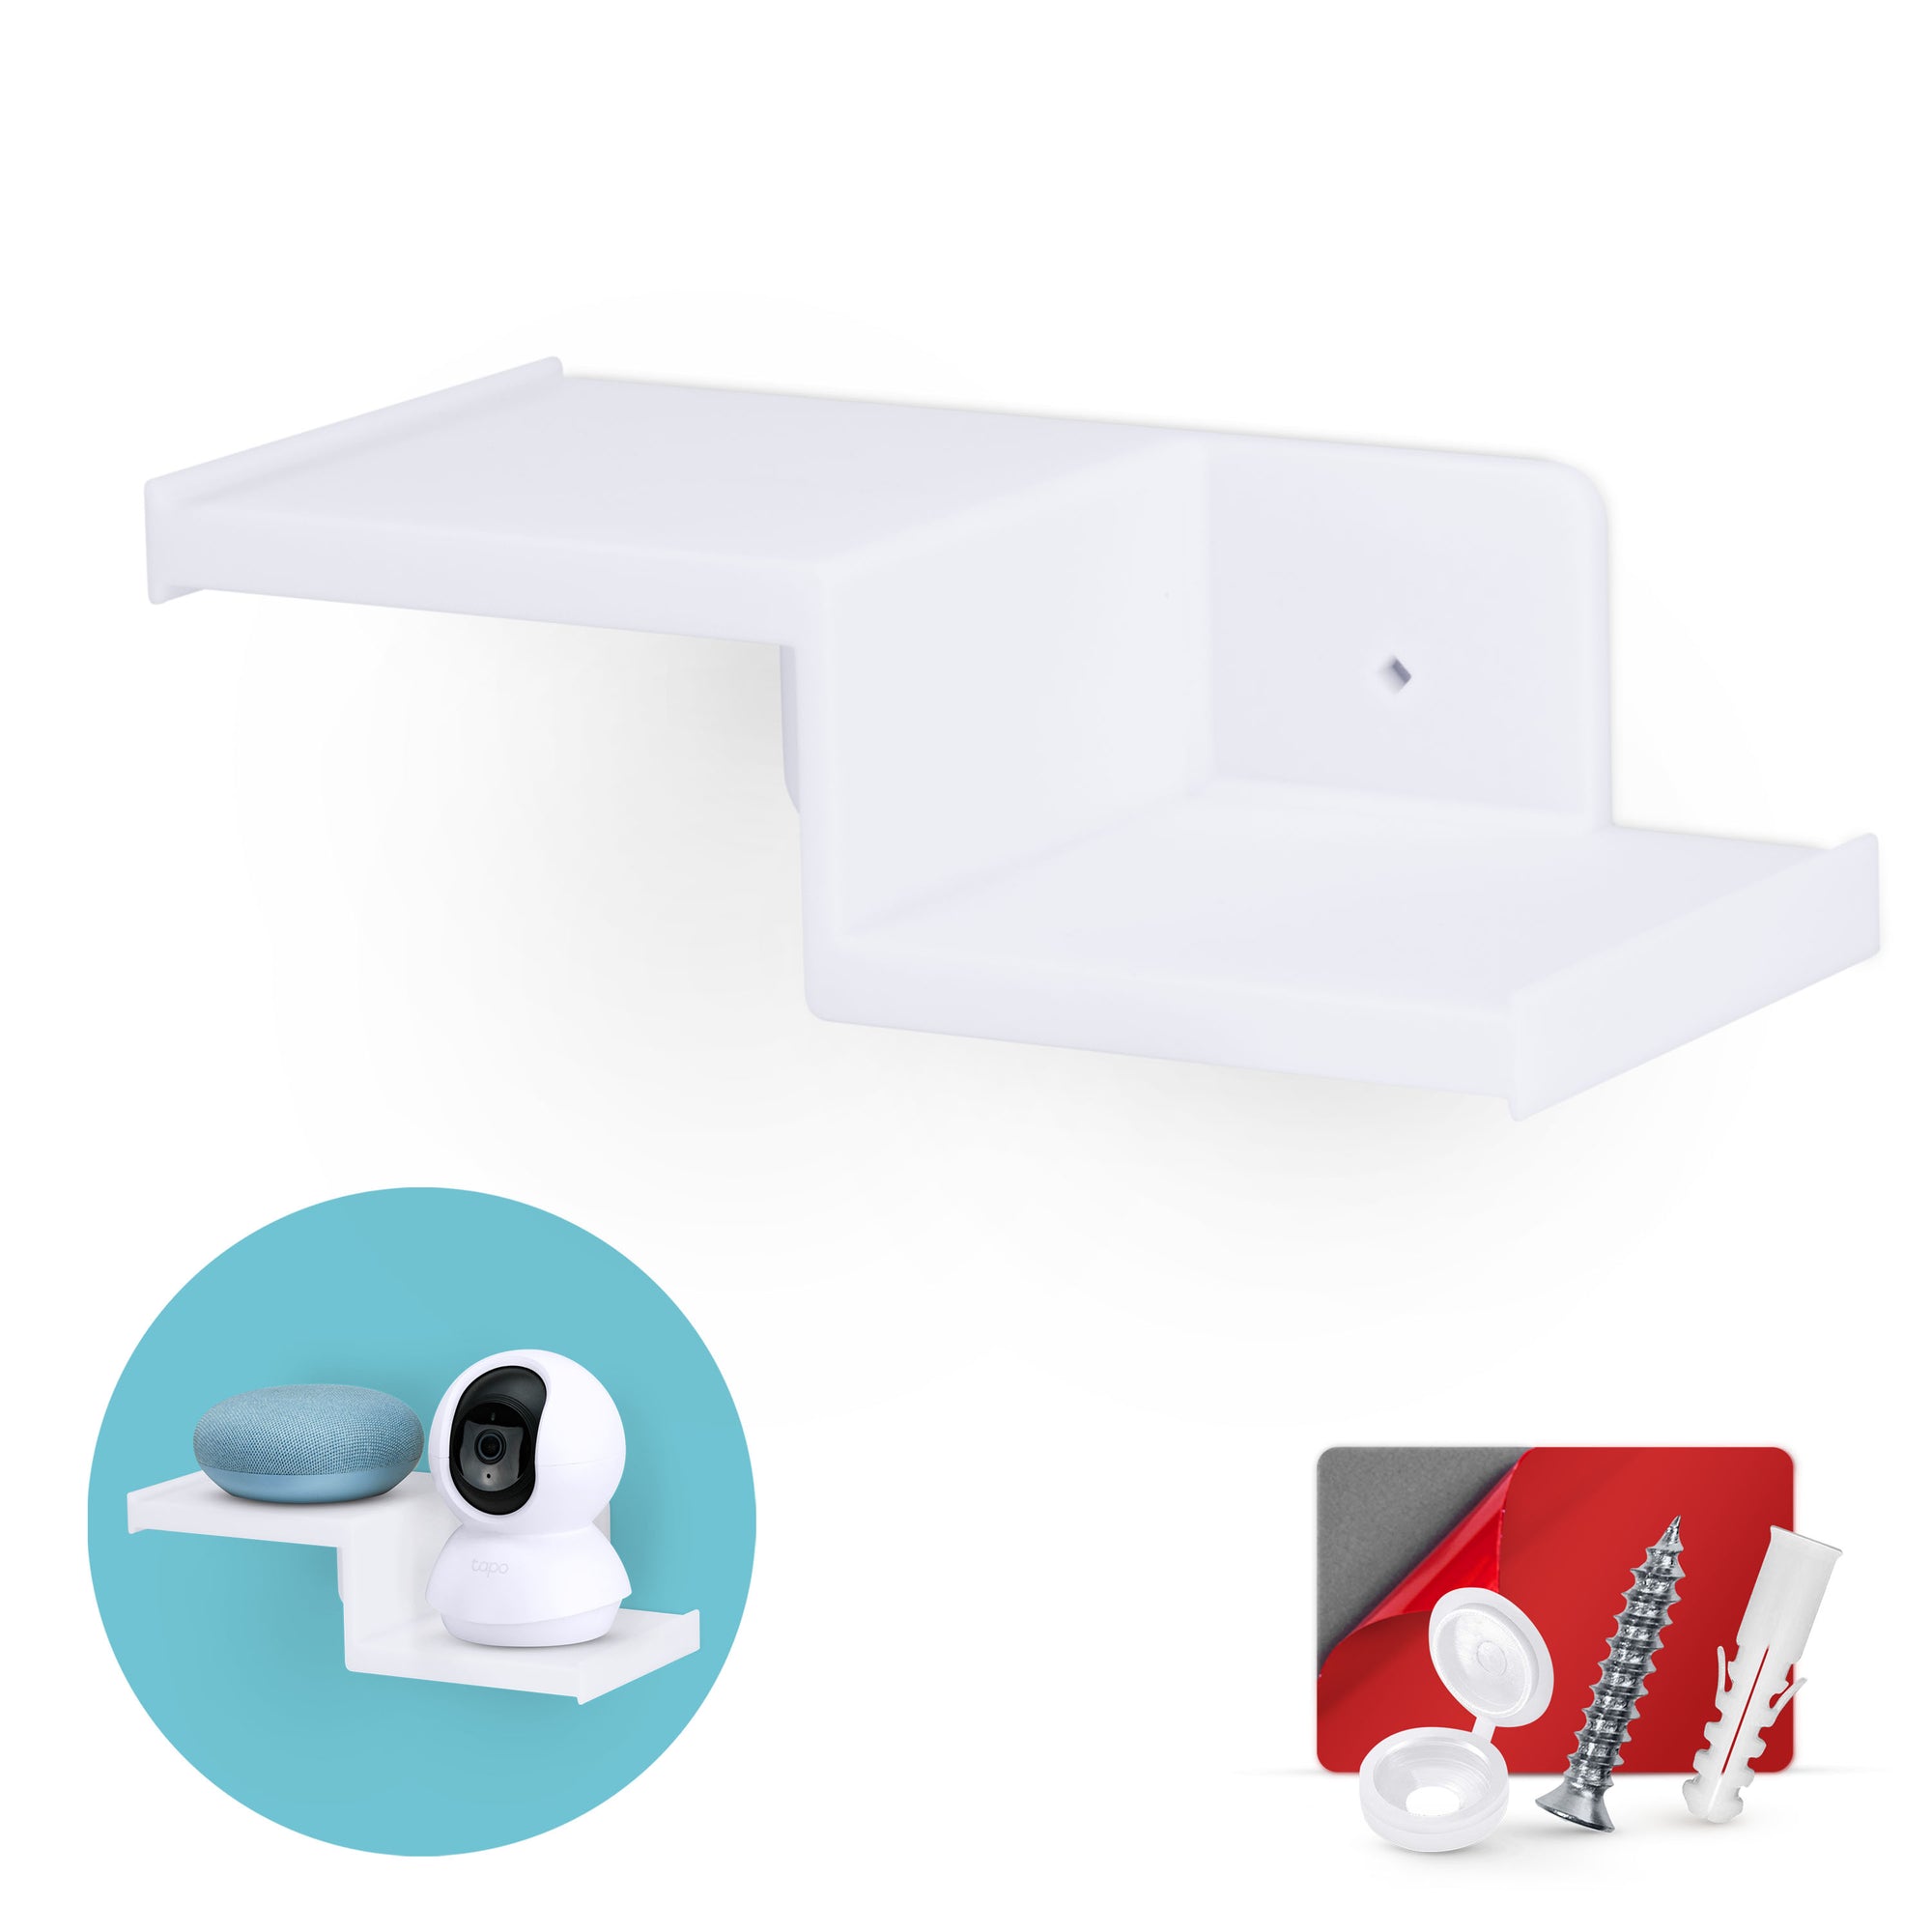 Drill Free Small Wall Mount Shelf For Security Cameras, Baby Monitors, Speakers, Routers, Plants & More, Strong Adhesive